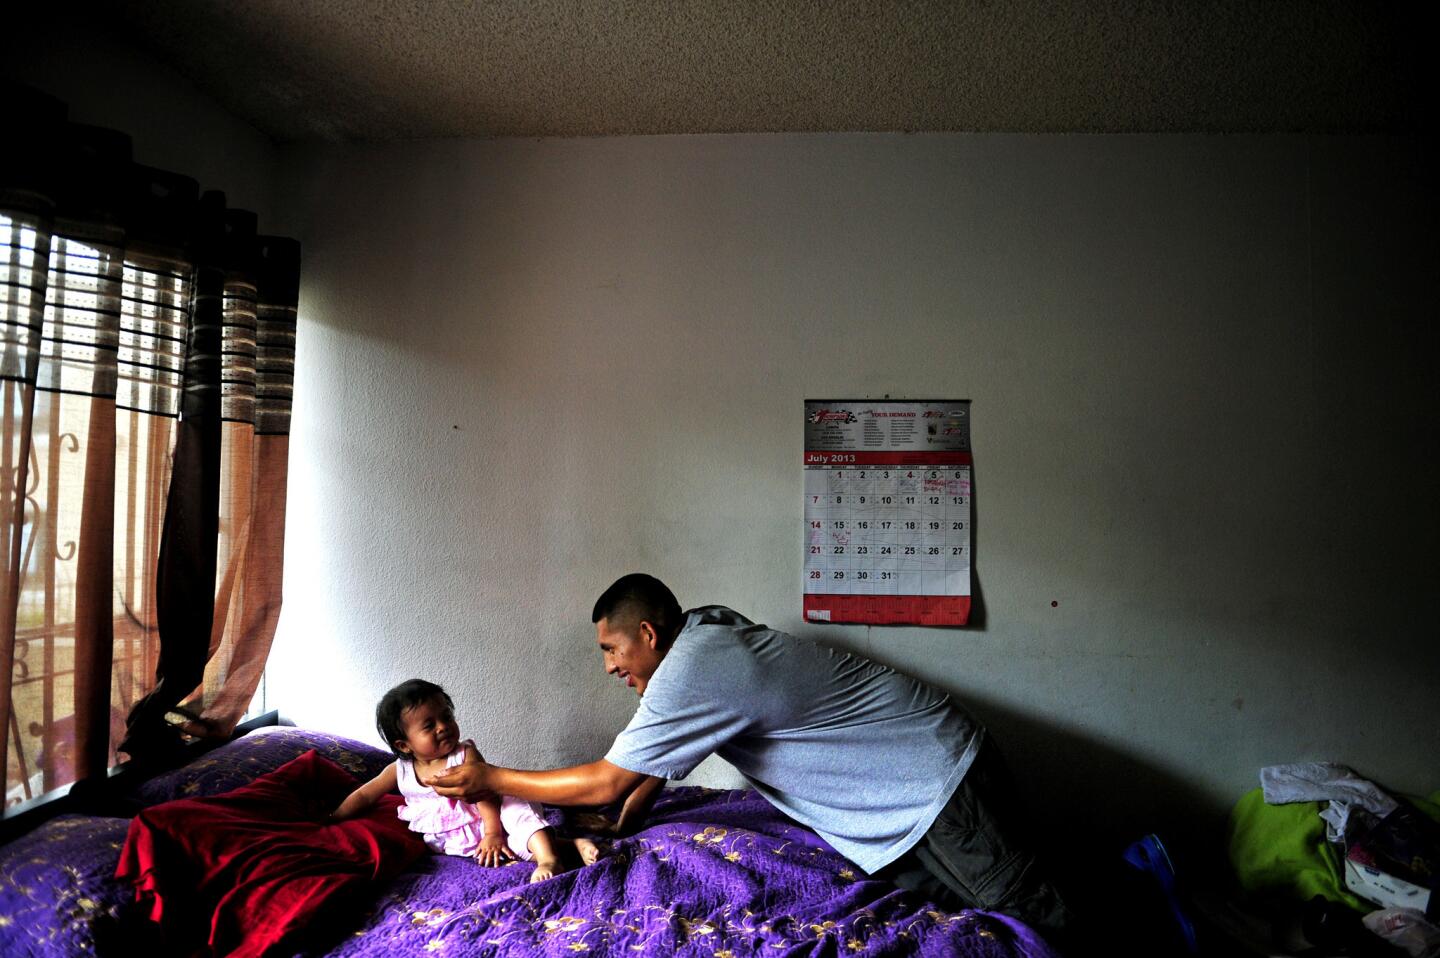 Frank Mariano, 16, a participant in the L.A. Fathers Program at Children's Hospital Los Angeles, jokes around with his 1-year-old daughter, Anabell, in their Koreatown home. In about a year, nearly 250 teenage fathers have gone through the 10-week program.